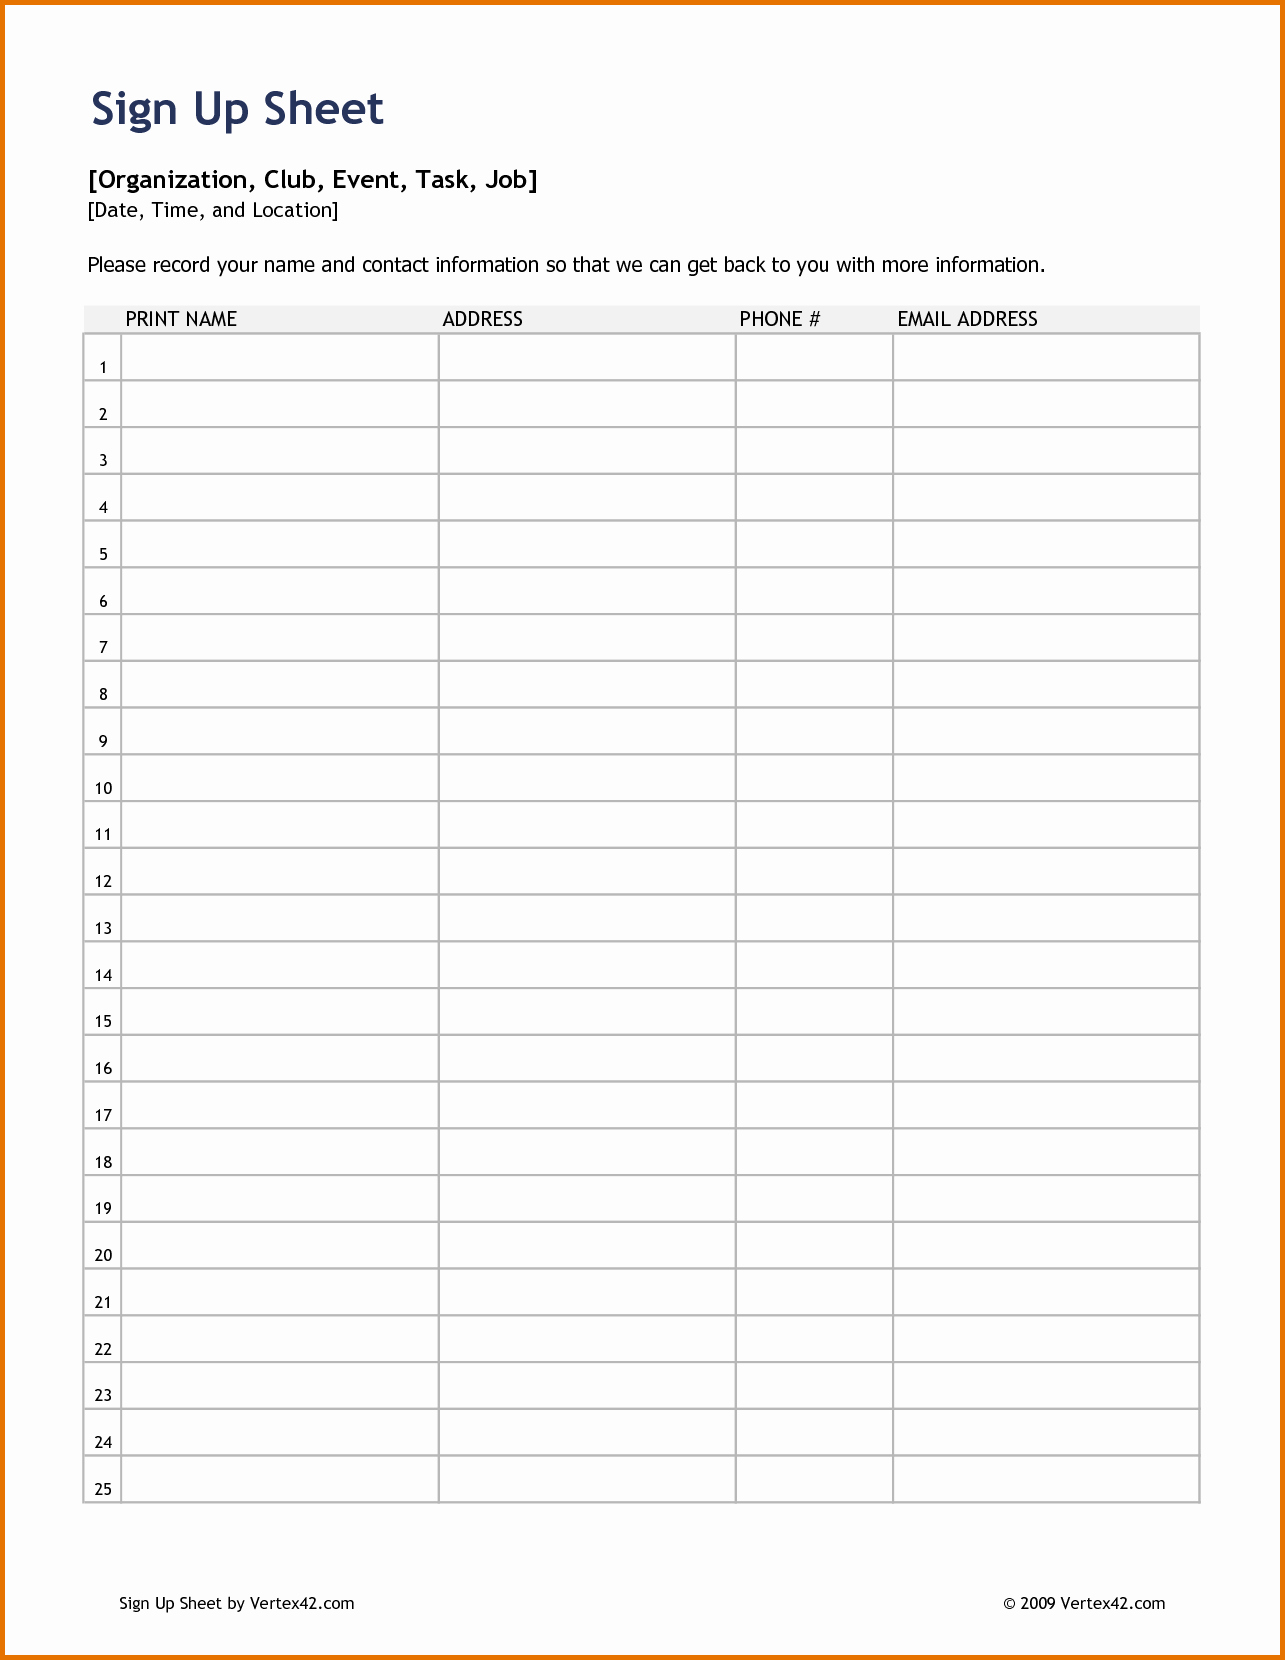 Email Sign Up Sheet Template Inspirational Free Download Sign Up Sheet Template Sign Up Sheet